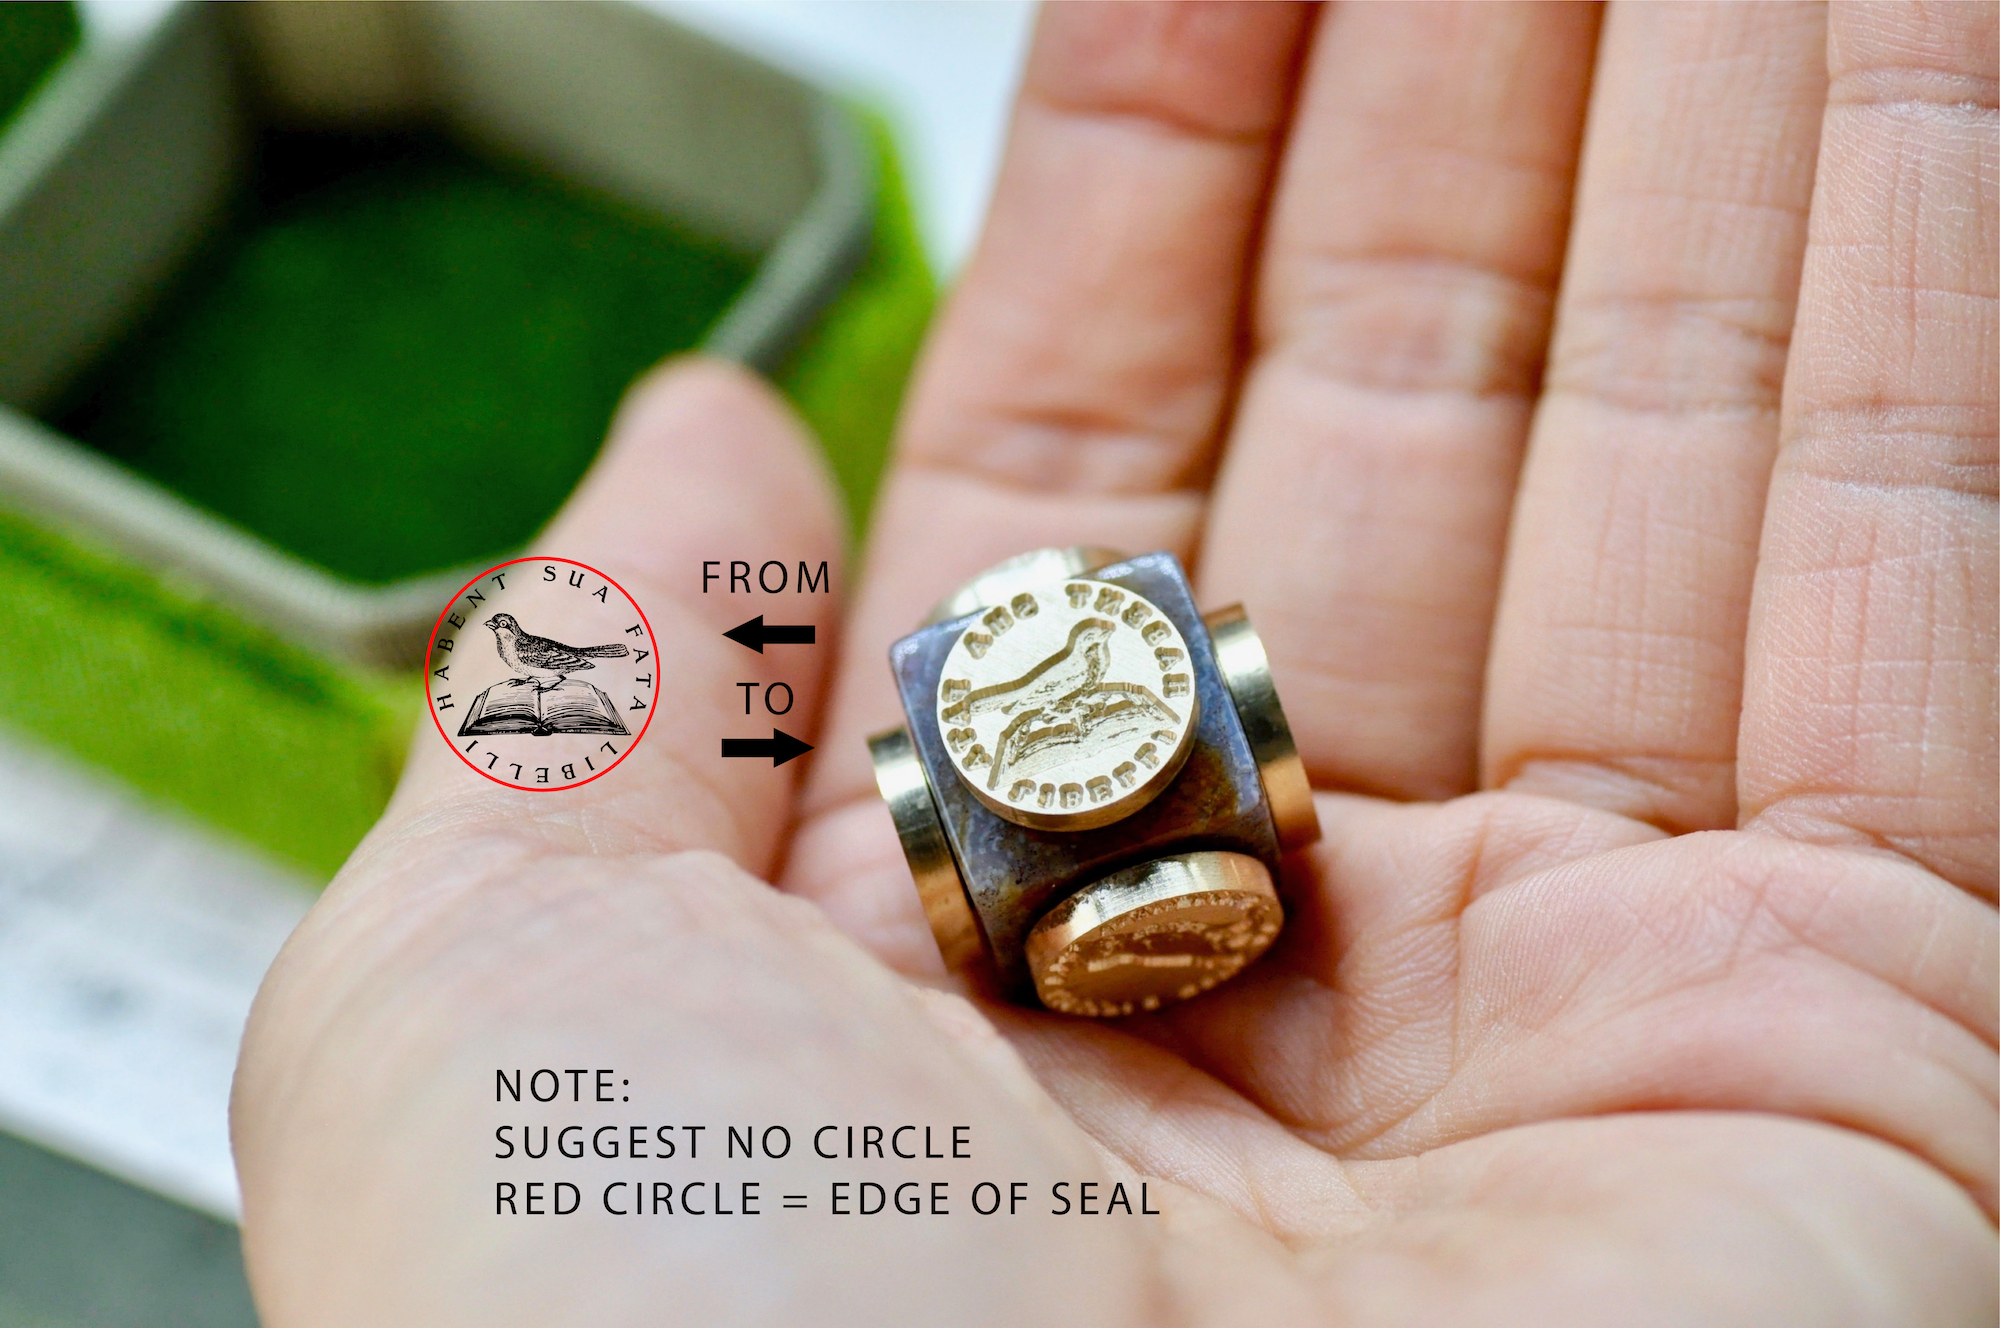 OOAK Design Your Own Cube Wax Seal | Indian Agate - Backtozero B20 - antique, antique inspired, Bird, book, cube, knowledge, latin, latin motto, lock, loyalty, Message, motto, natural stone, newarrivals, owl, positive, positivity, Retro, secure, stone, swallow, wings, wisdom